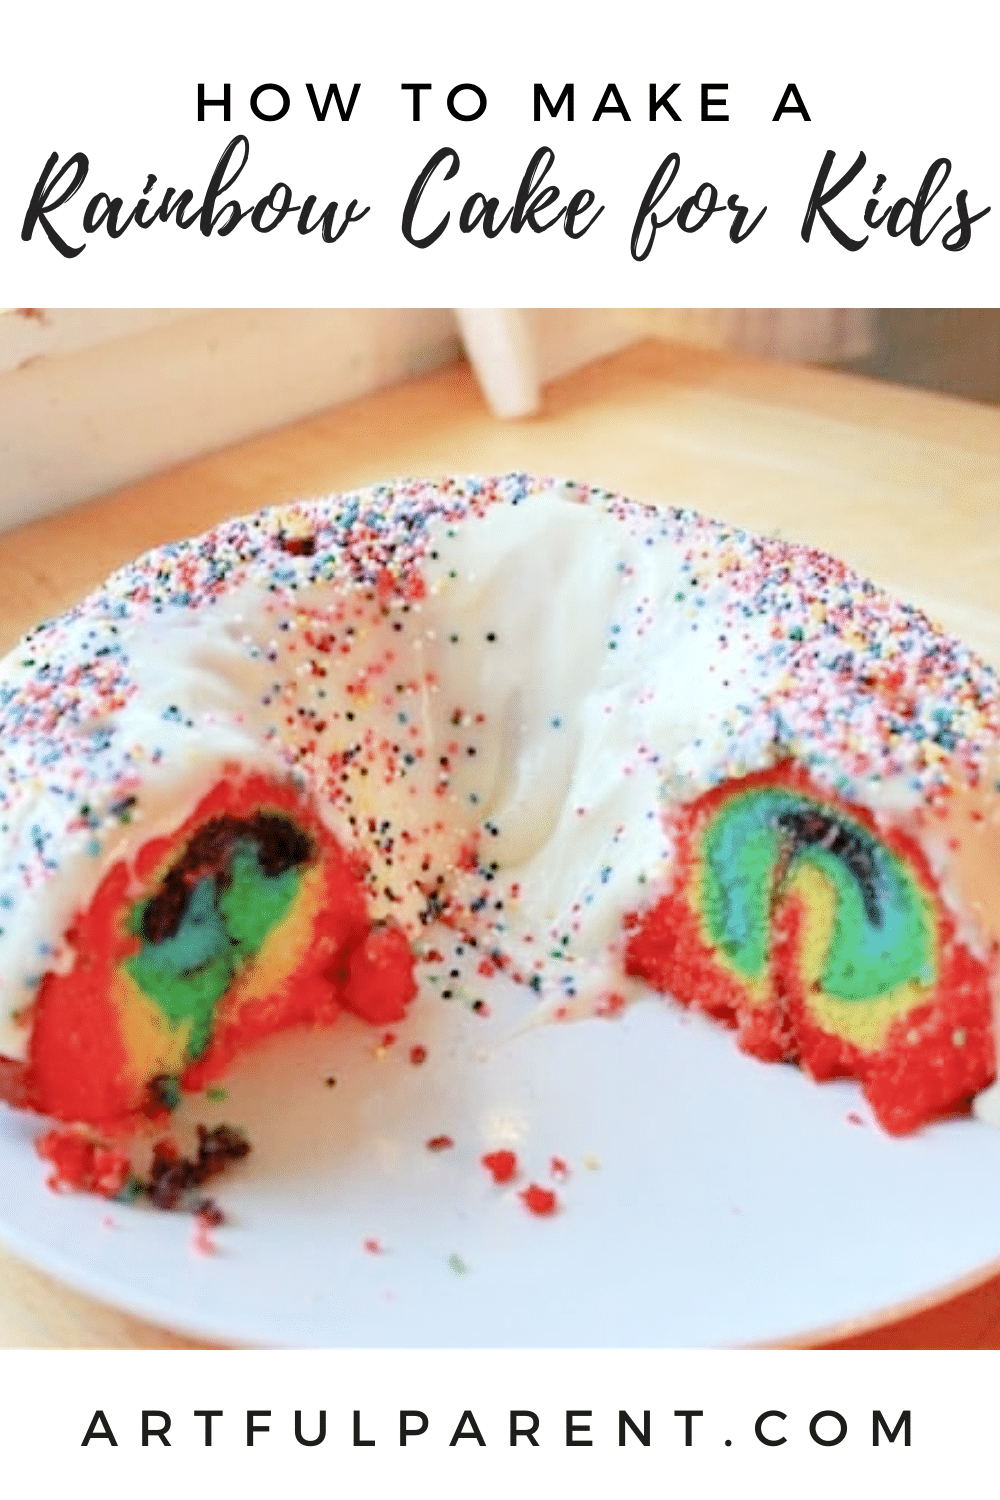 How to Make a Rainbow Cake for Kids